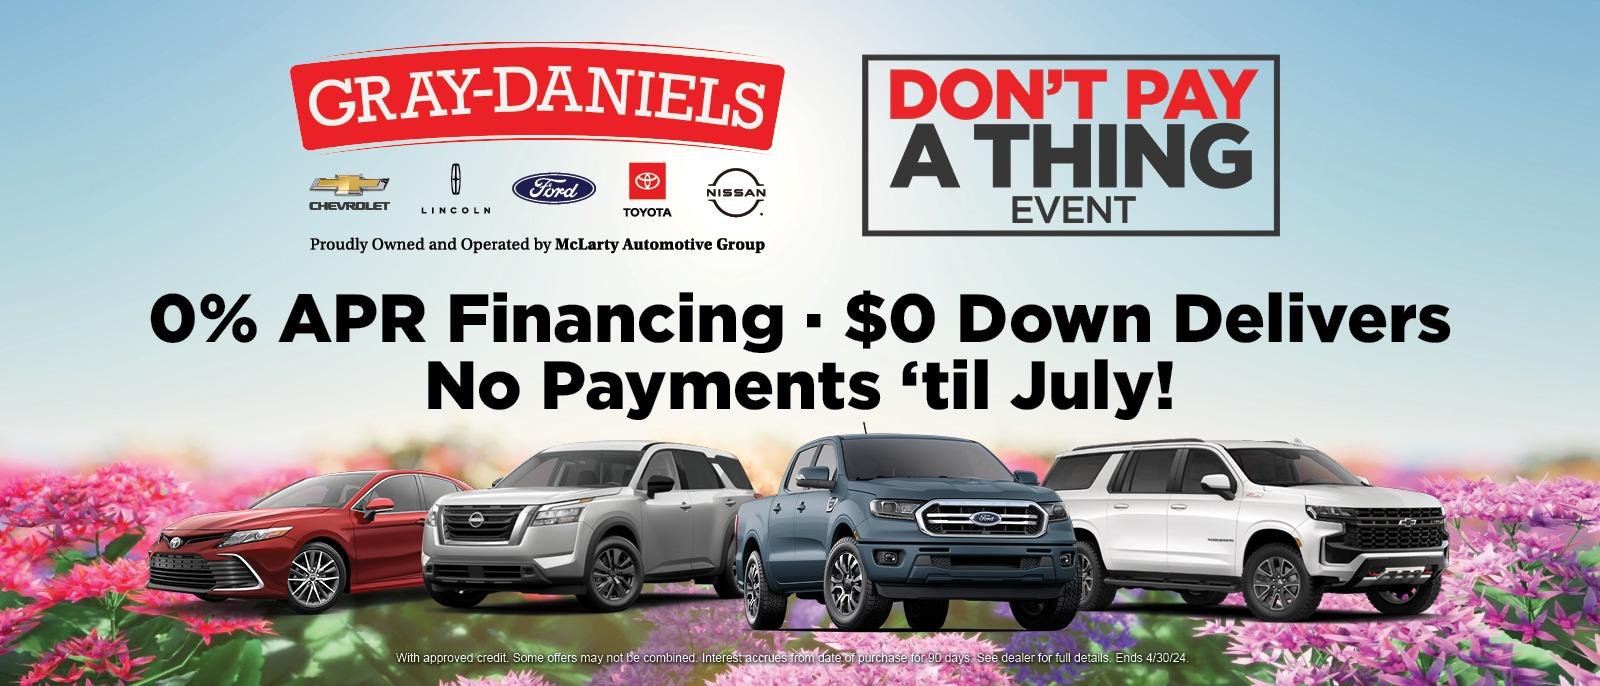 Don't Pay a thing event - 0% APR - $0 down delivers - no payments 'til july